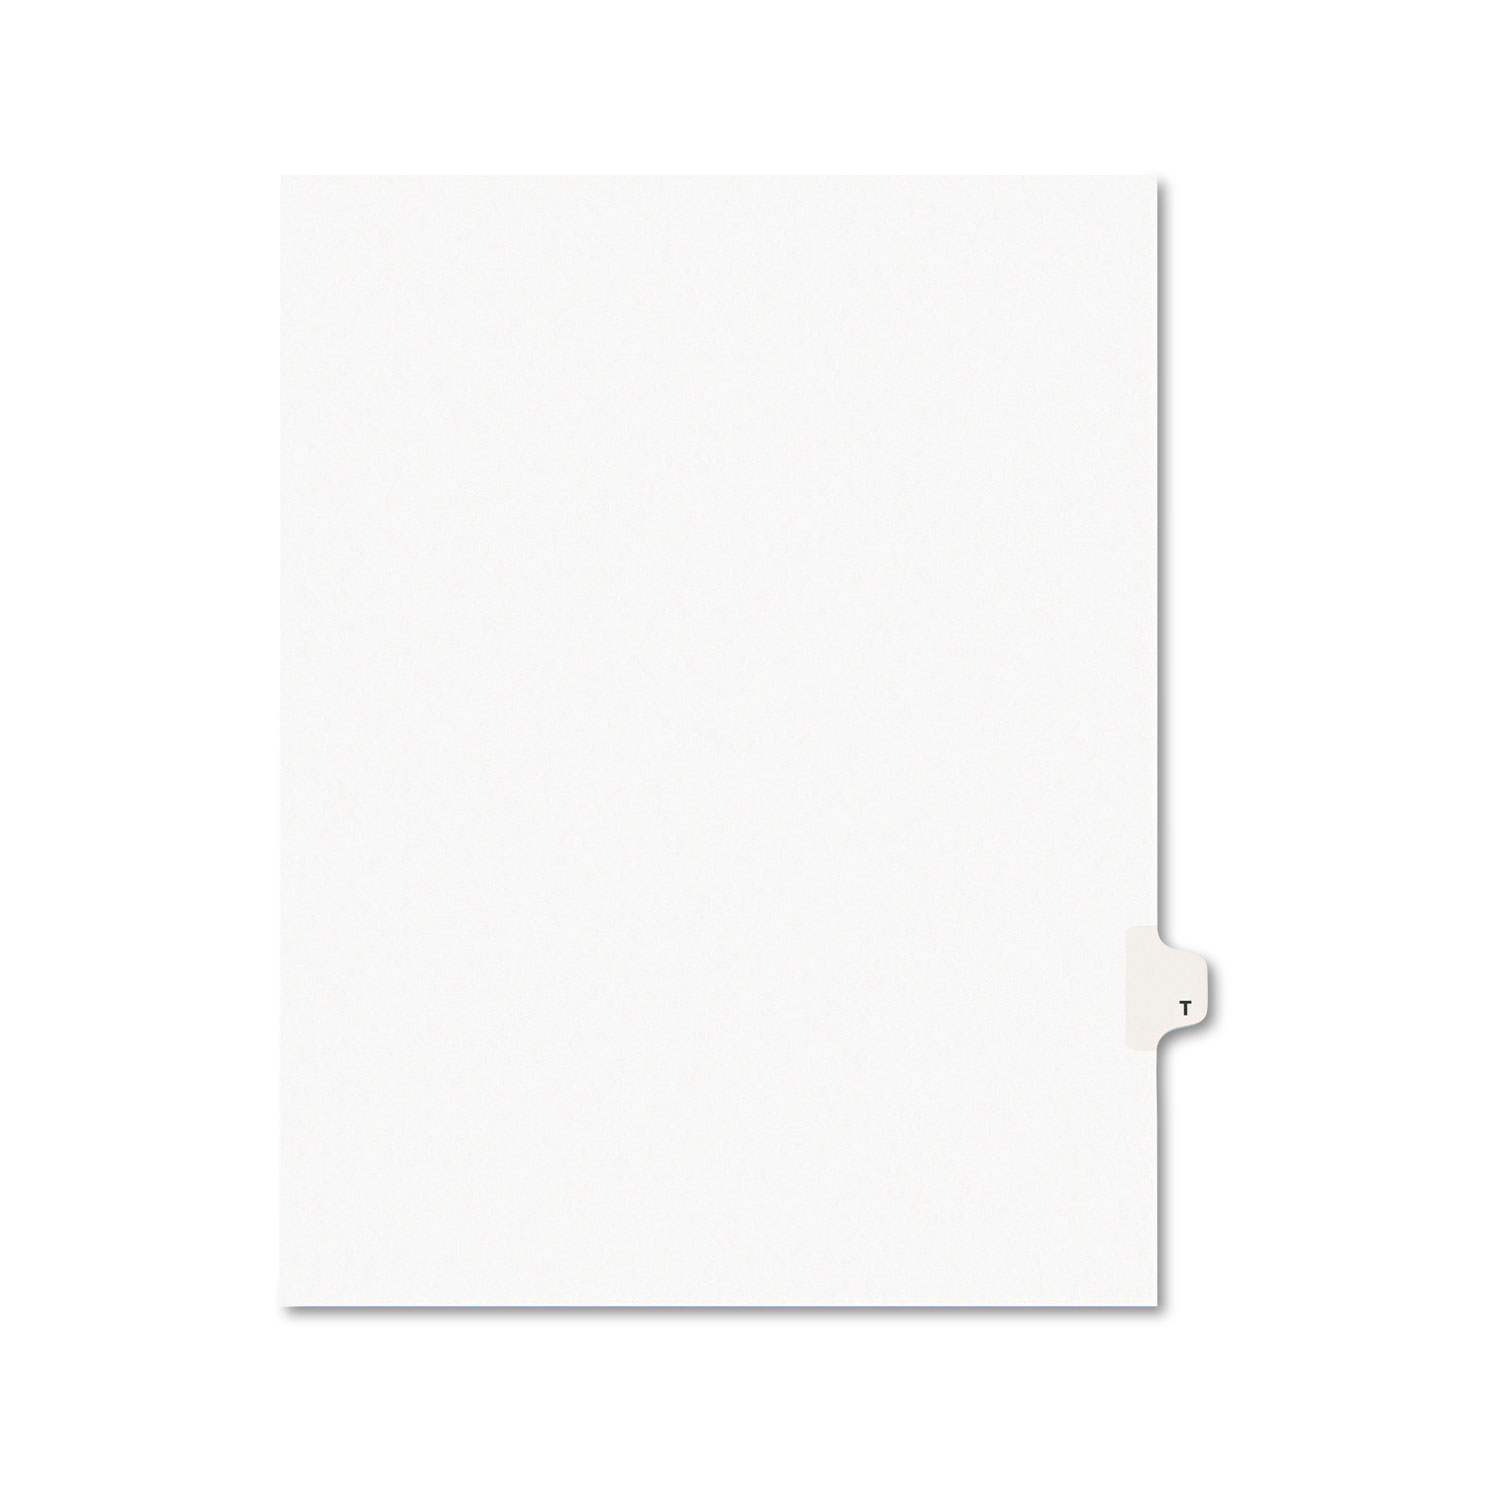  Avery 01420 Preprinted Legal Exhibit Side Tab Index Dividers, Avery Style, 26-Tab, T, 11 x 8.5, White, 25/Pack (AVE01420) 